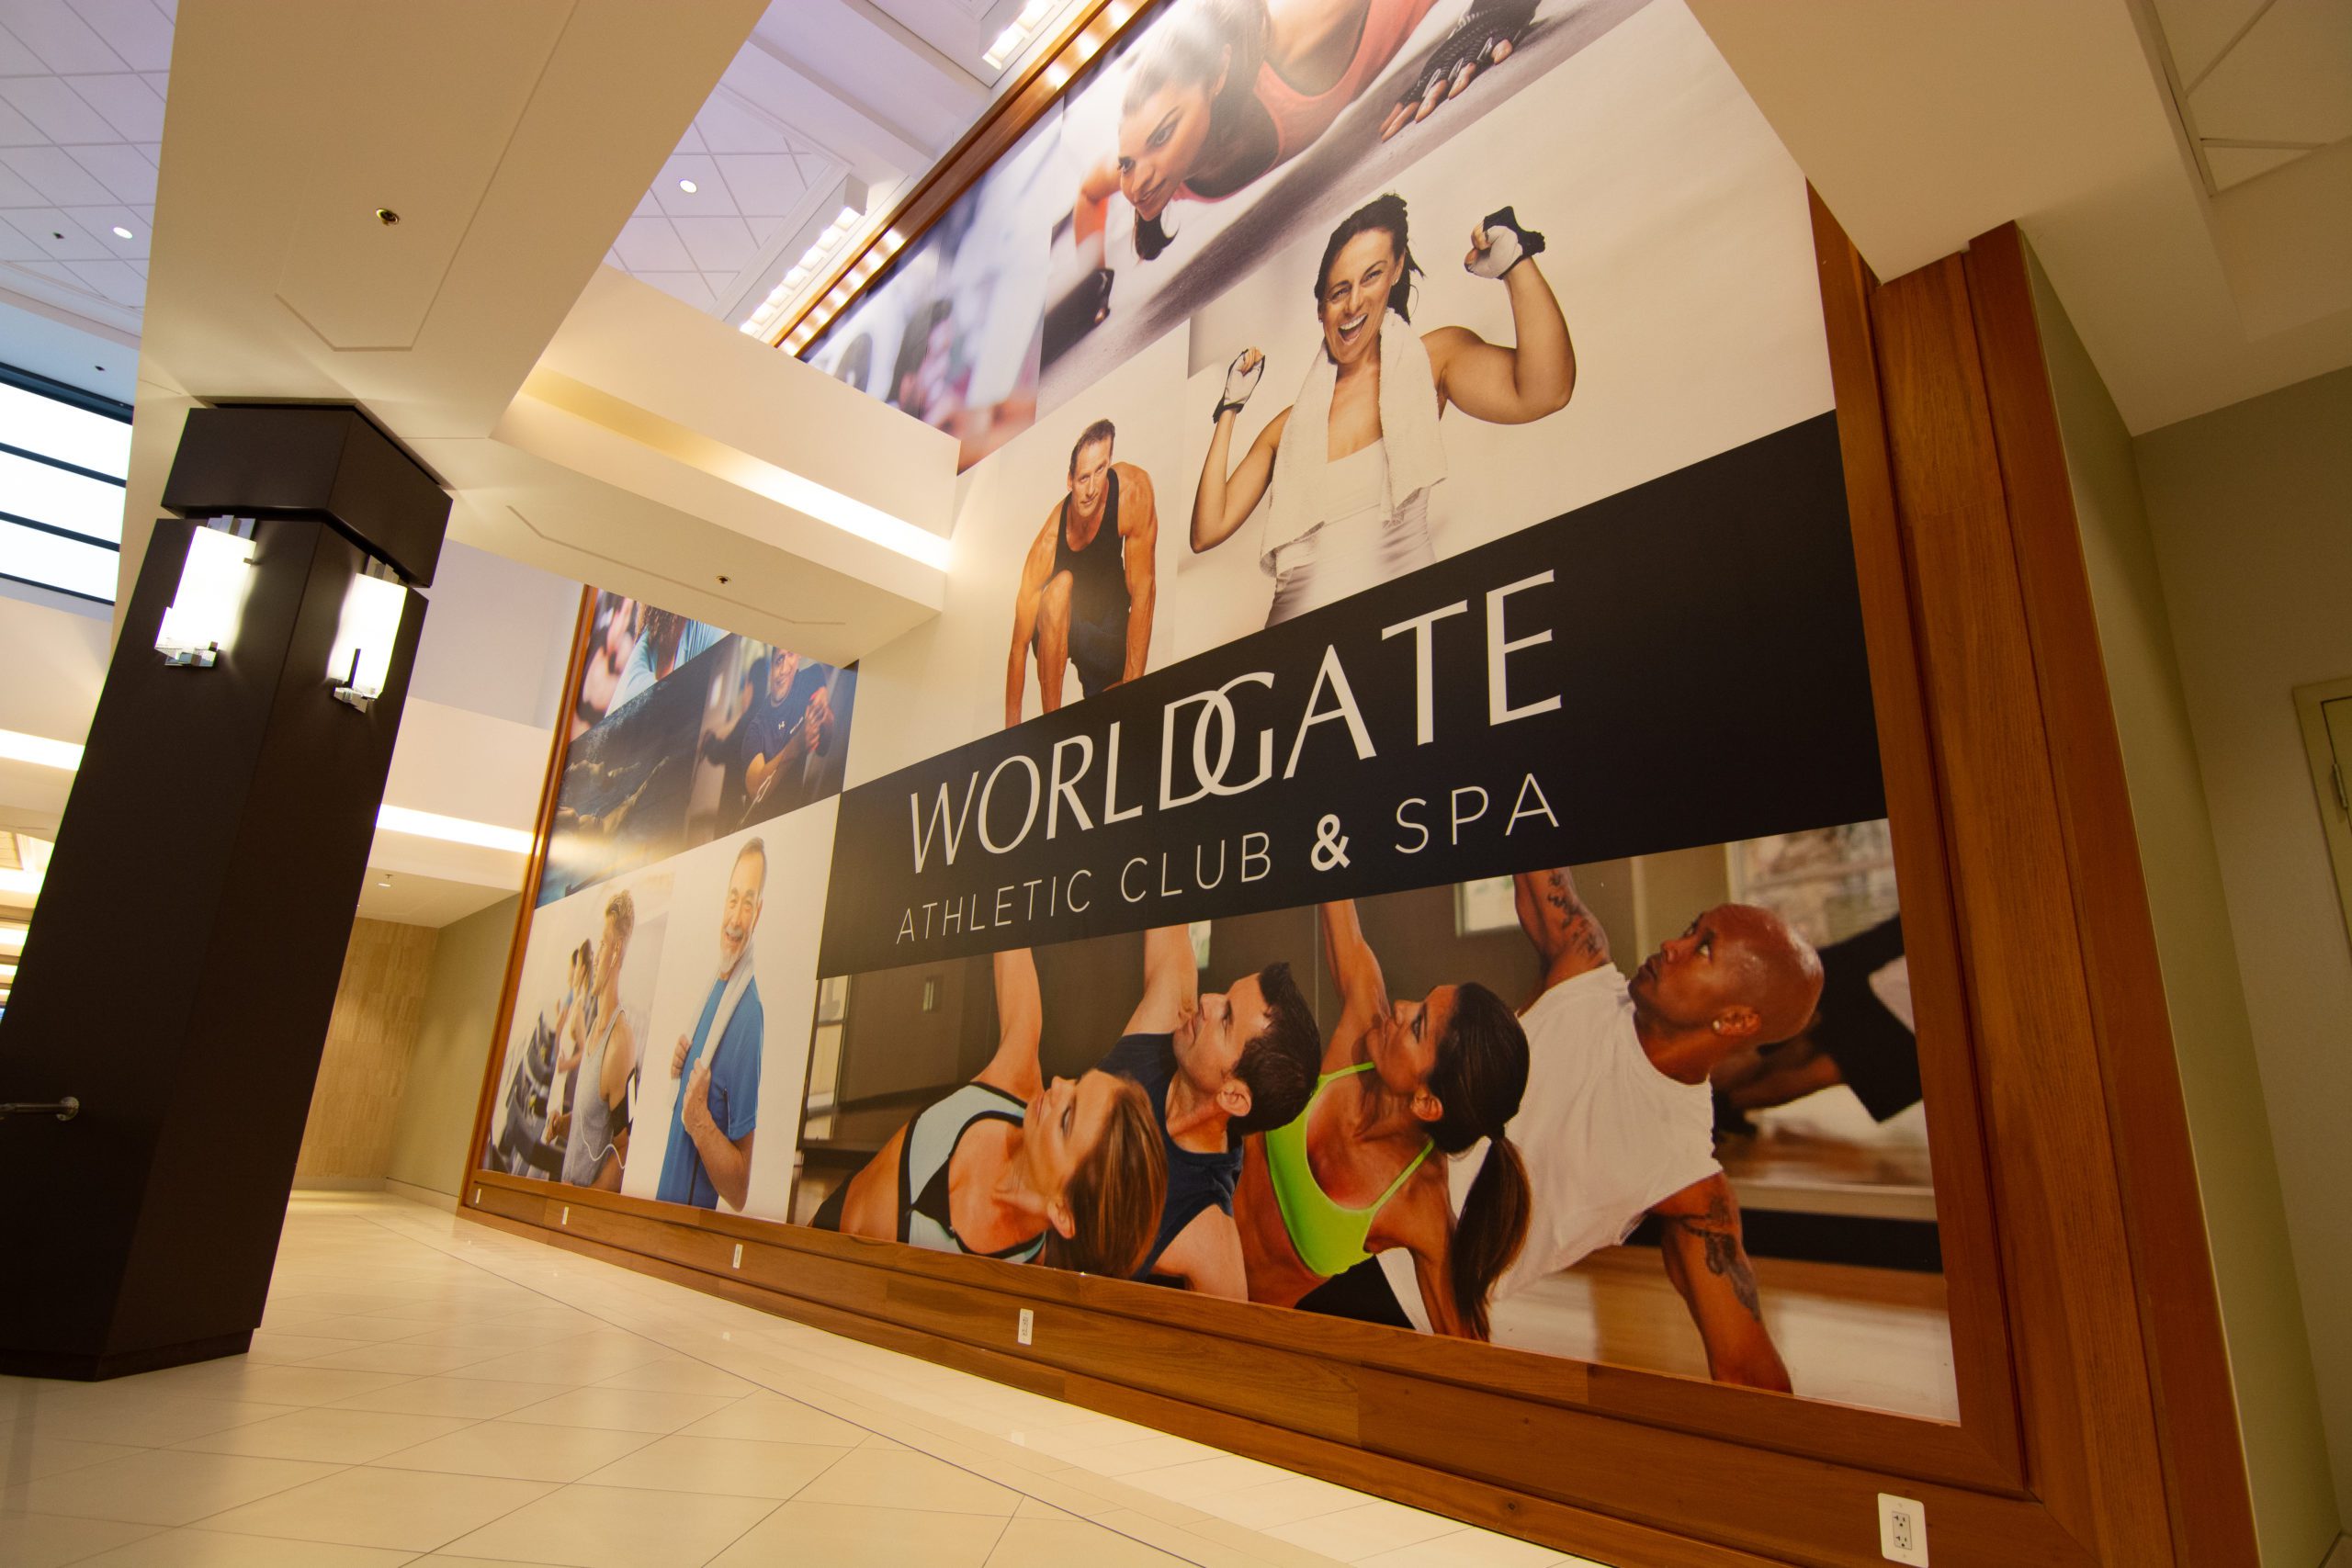 Worldgate Fitness Facility Changing Management Companies, From Sport & Health to WTS International